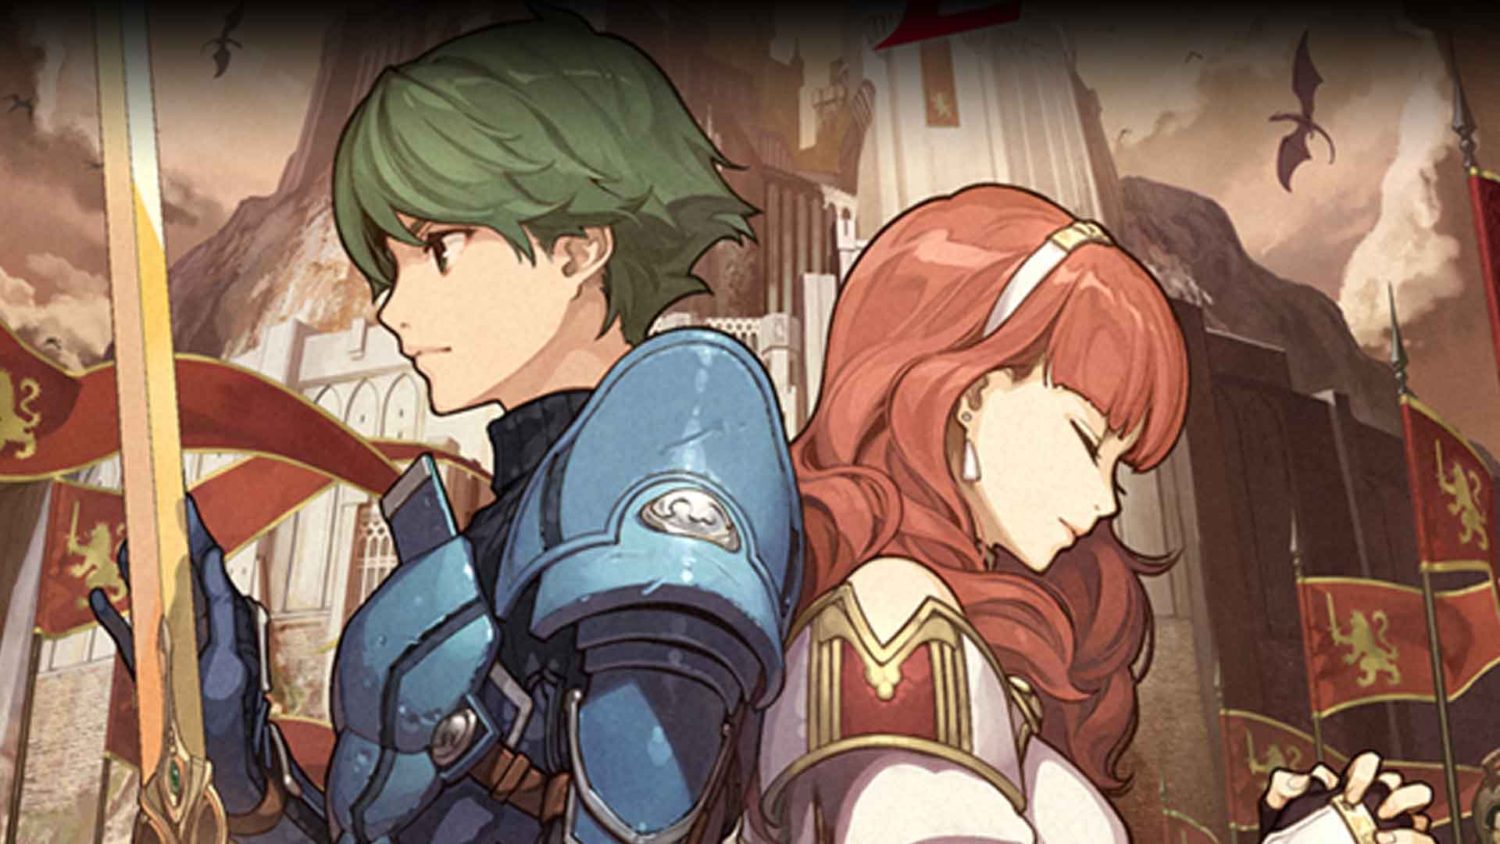 Fire Emblem Echoes Shadows of Valentia release date confirmed for